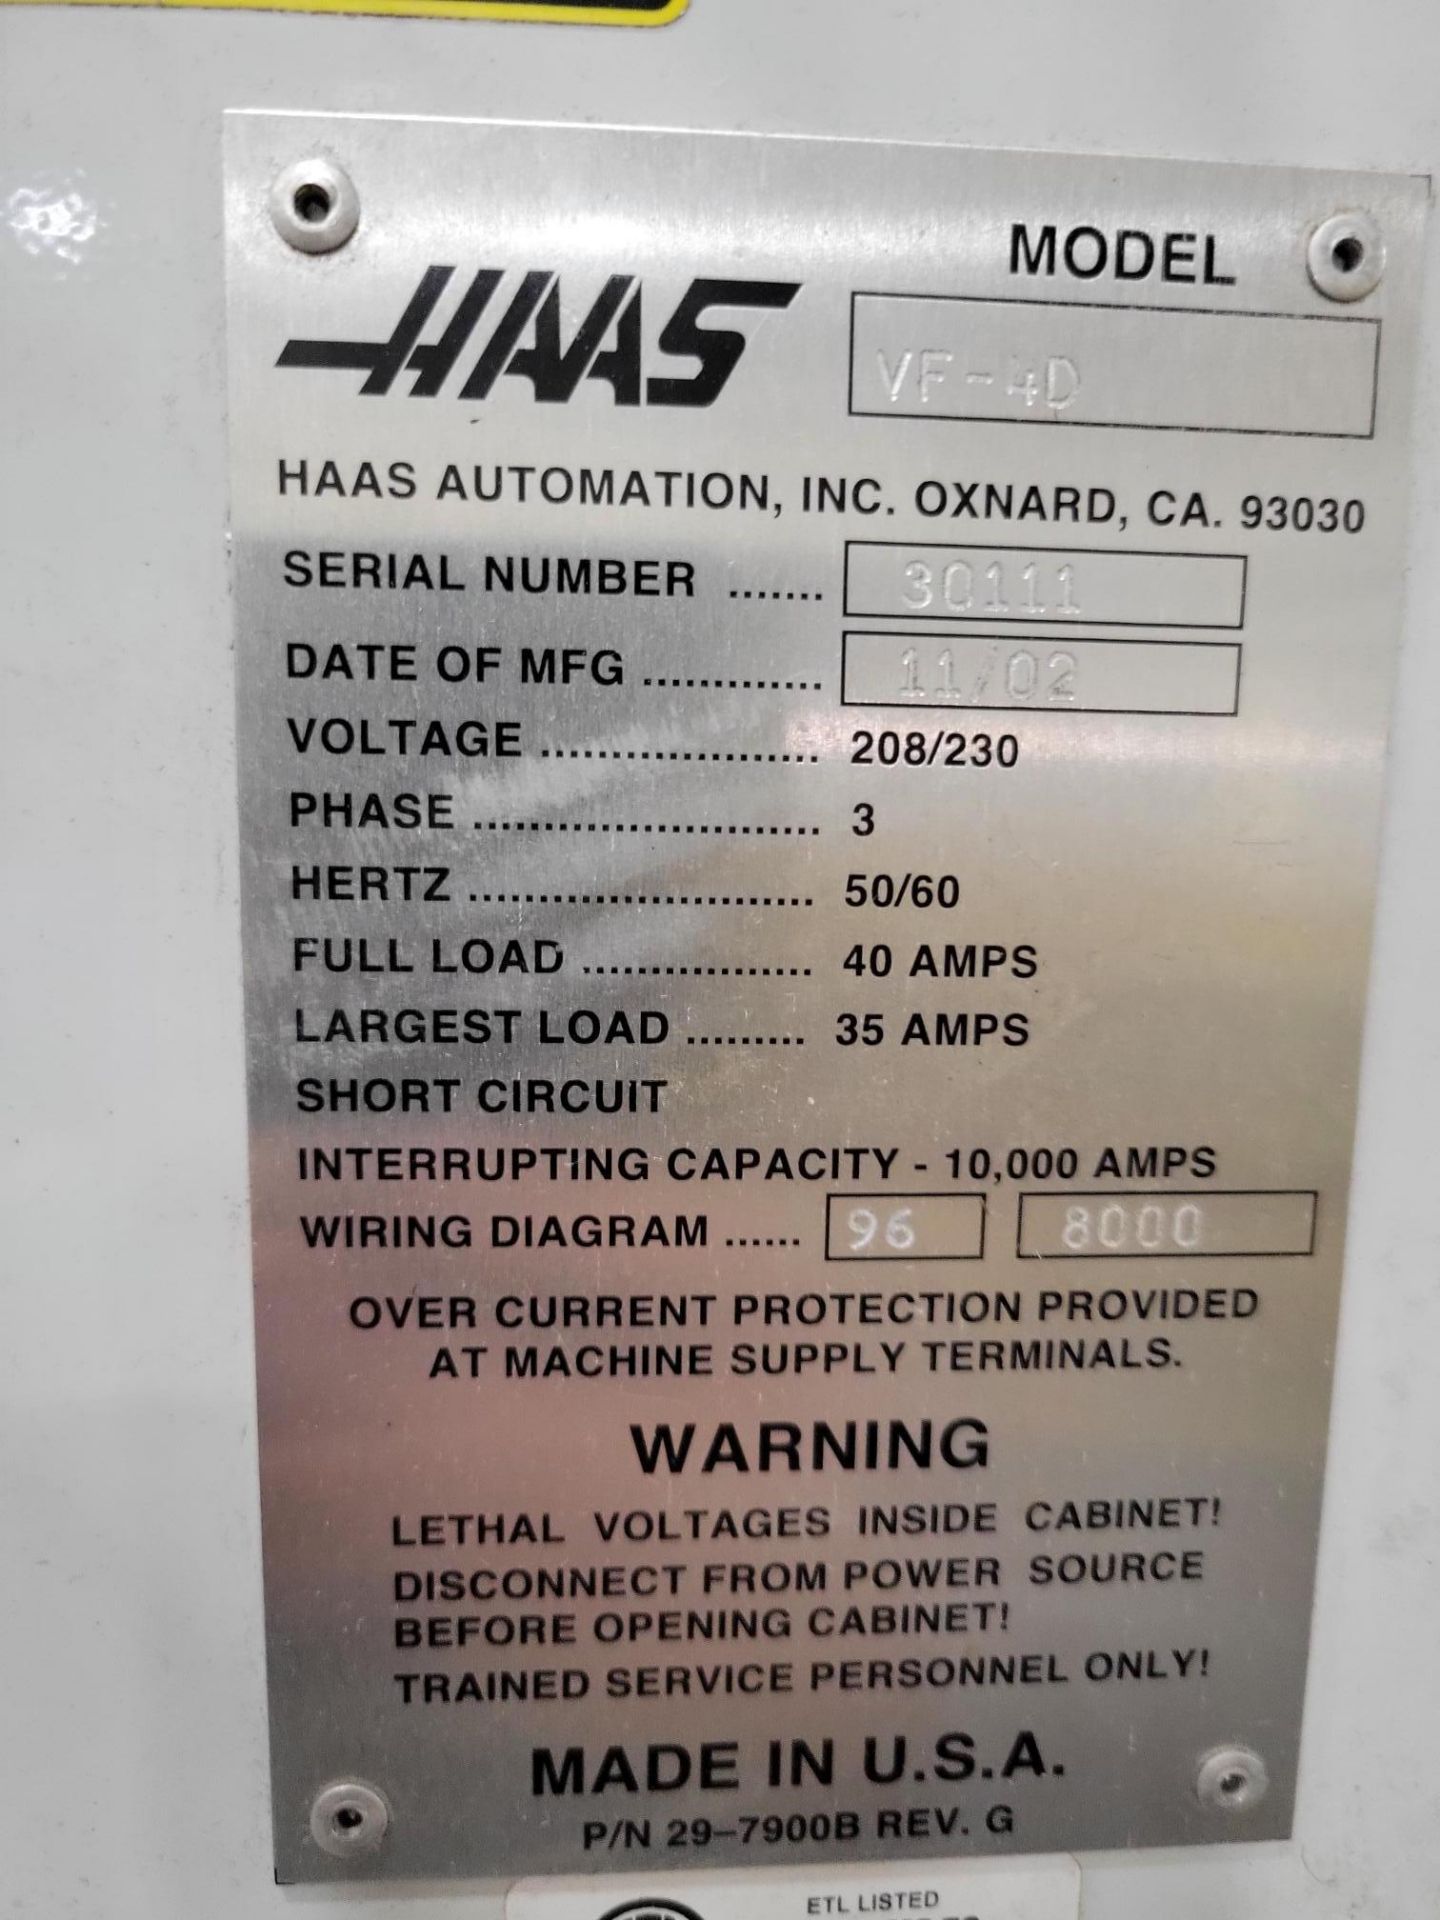 HAAS VF-4D CNC VERTICAL MACHINING CENTER, 2002 - Image 12 of 14